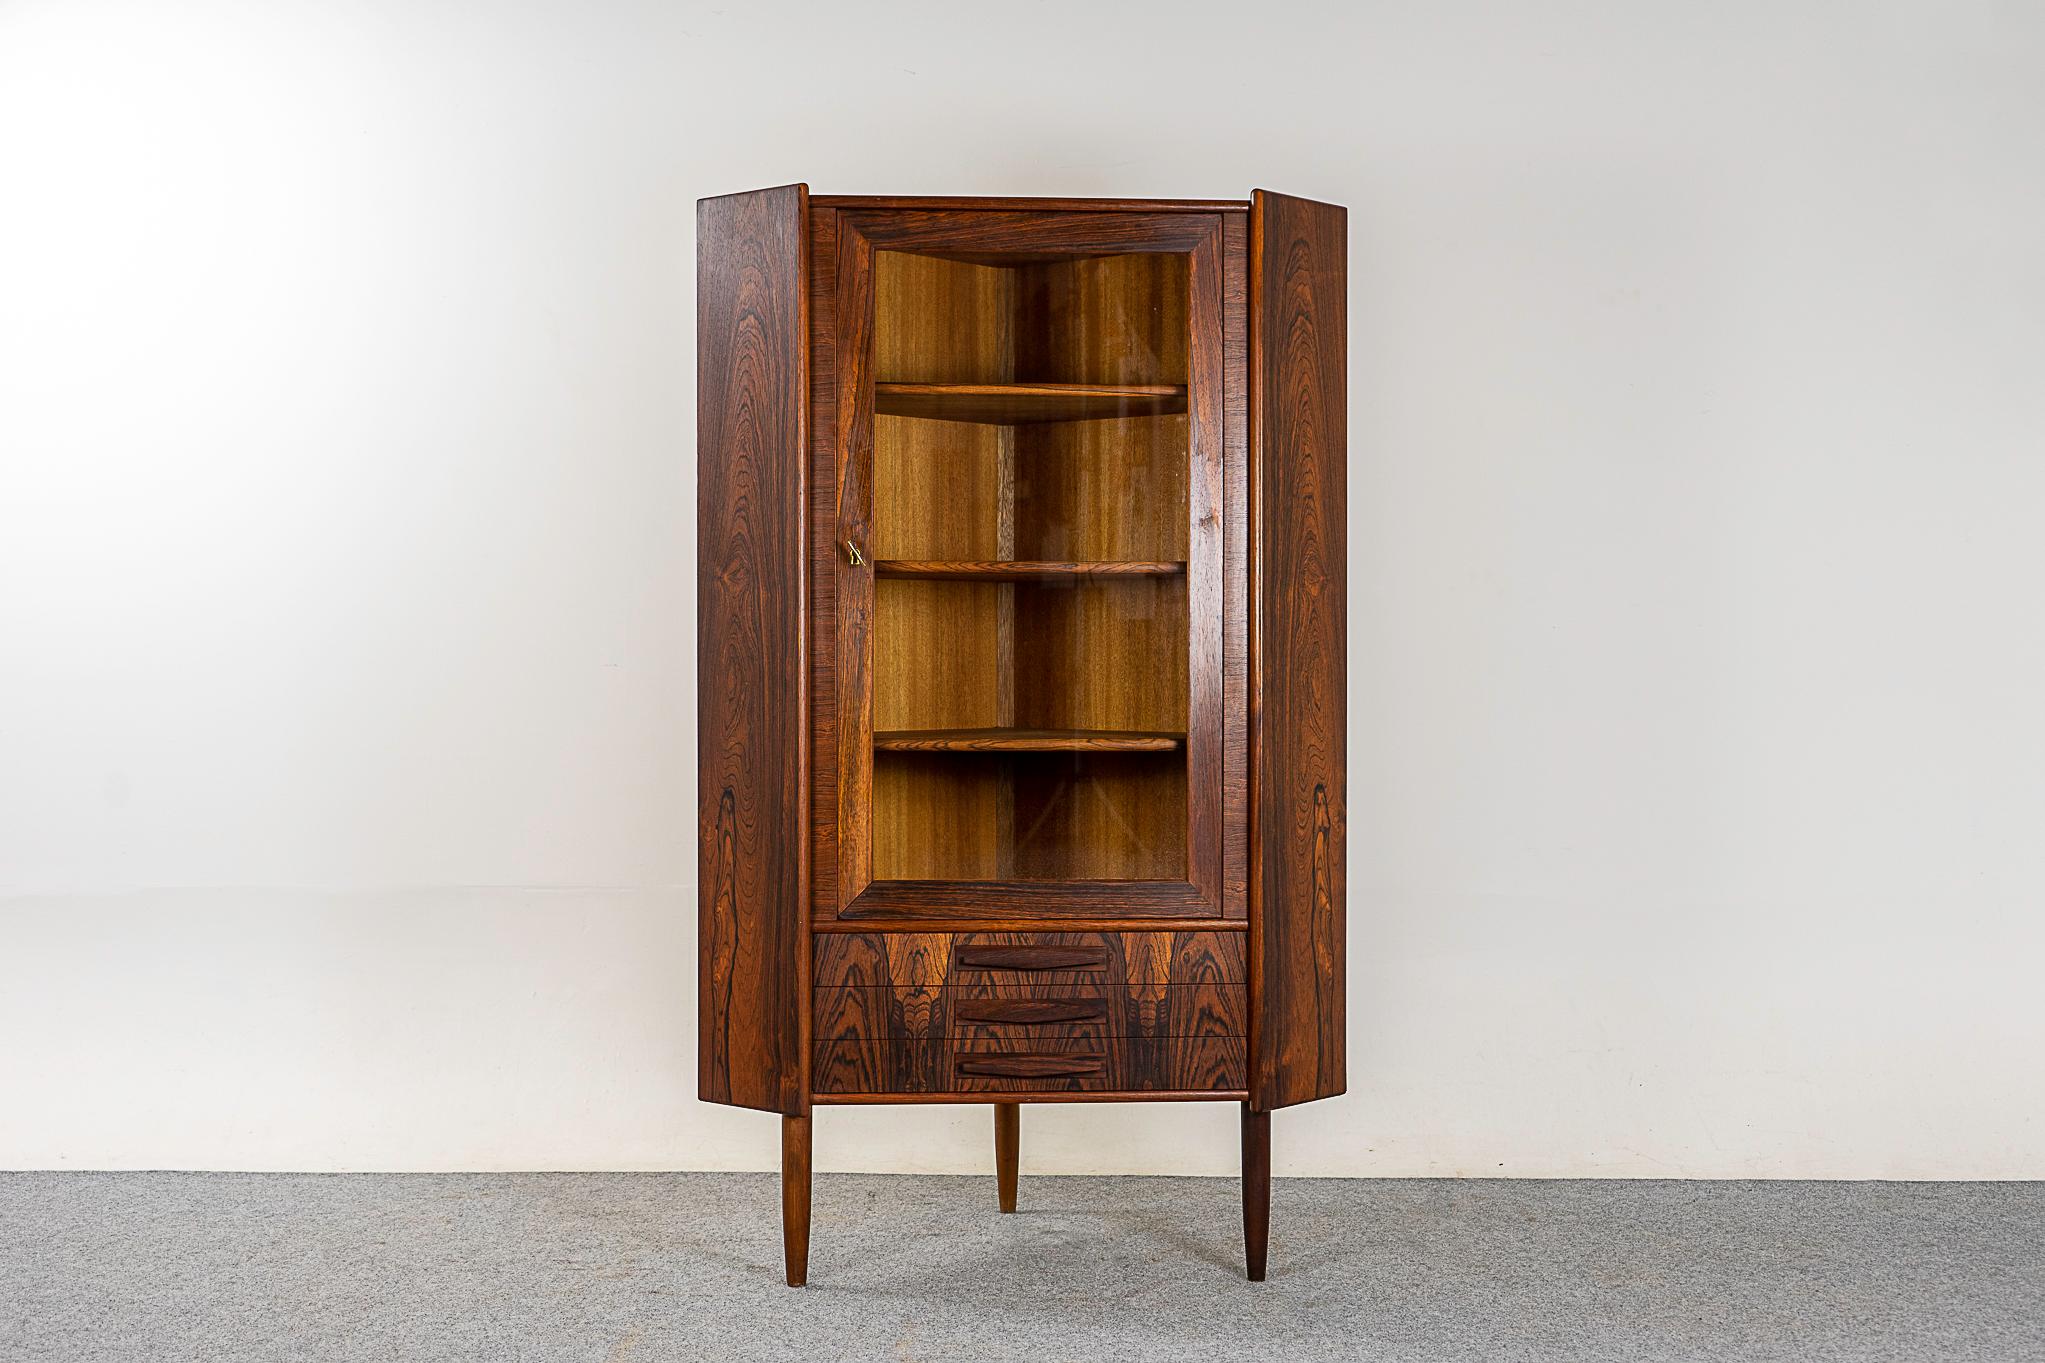 Rosewood Danish corner cabinet, circa 1960s. New pristine glass, internal shelving, drawers have lovely grain match up, figurative veneer throughout. Hide away clutter, show off your favourite things!.

Great original condition, minor marks